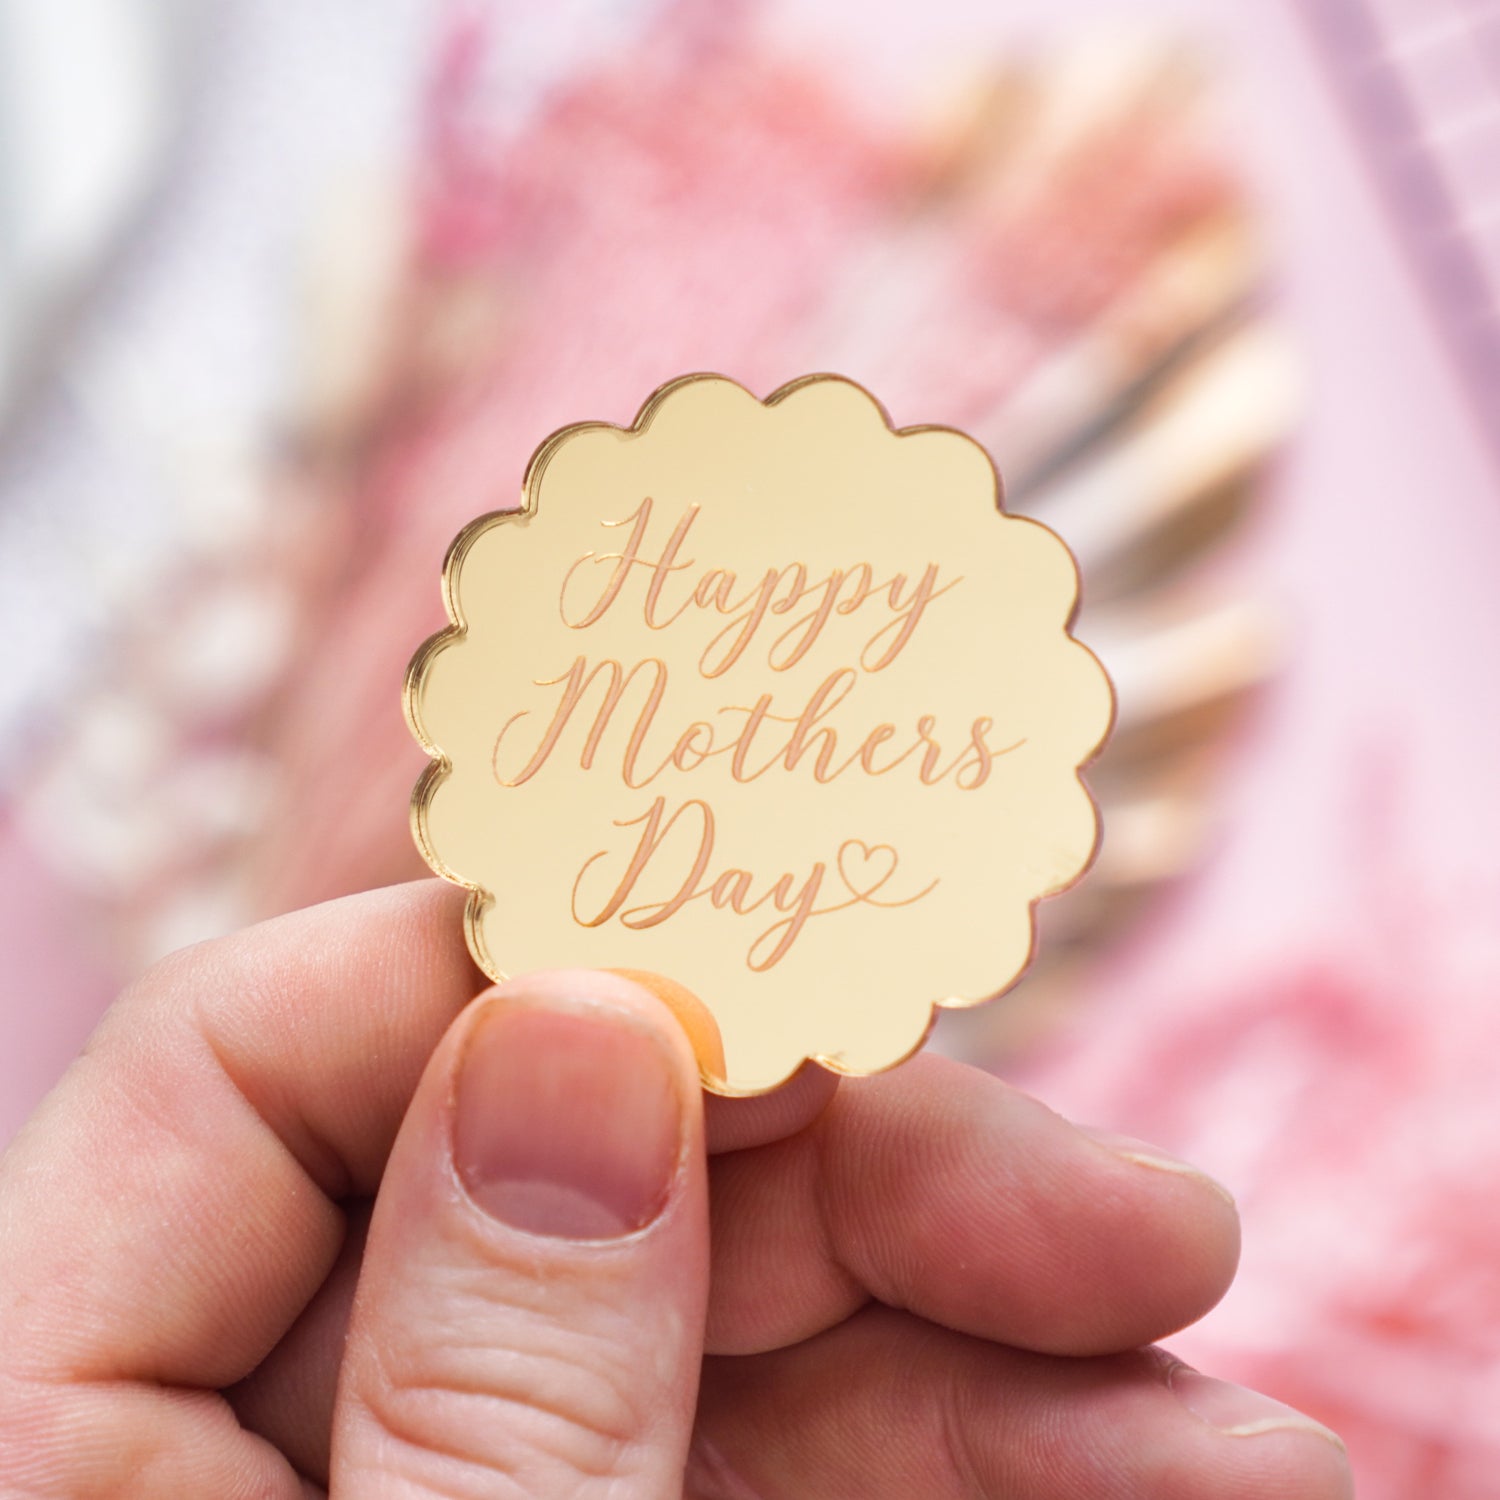 Mothers day cake decorations